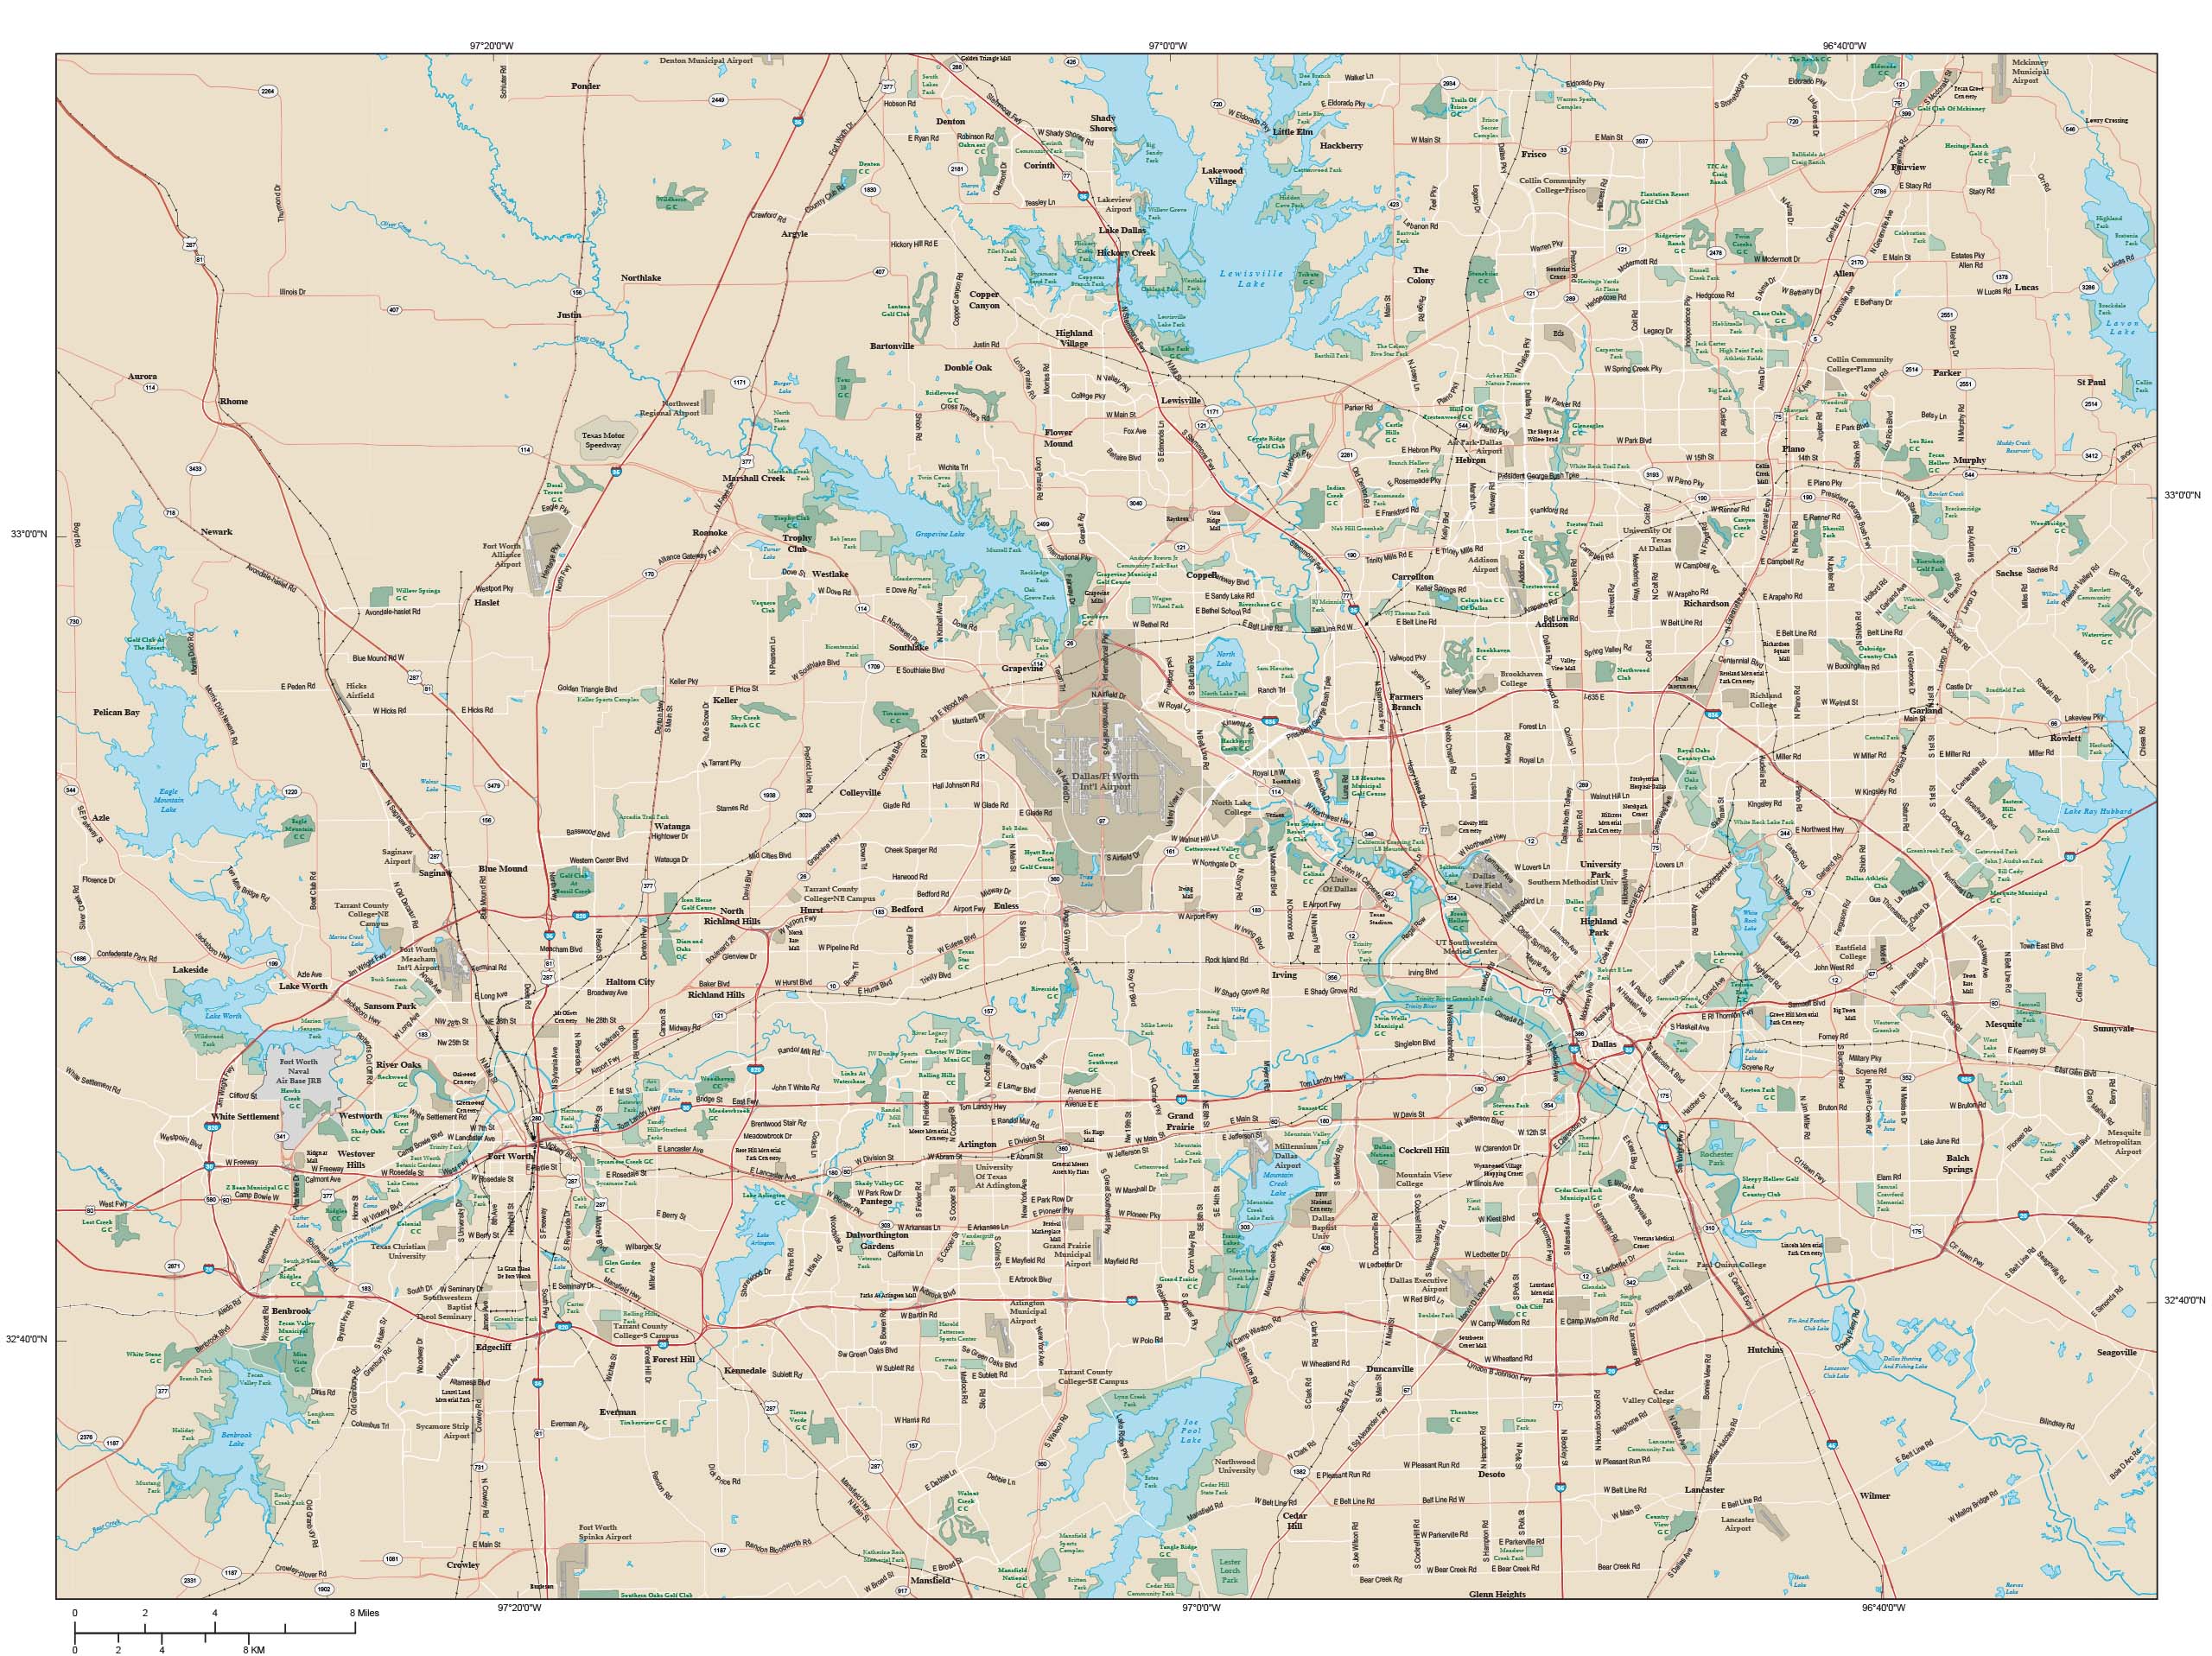 Dallas / Fort Worth Metro Area Wall Map by Map Resources - MapSales